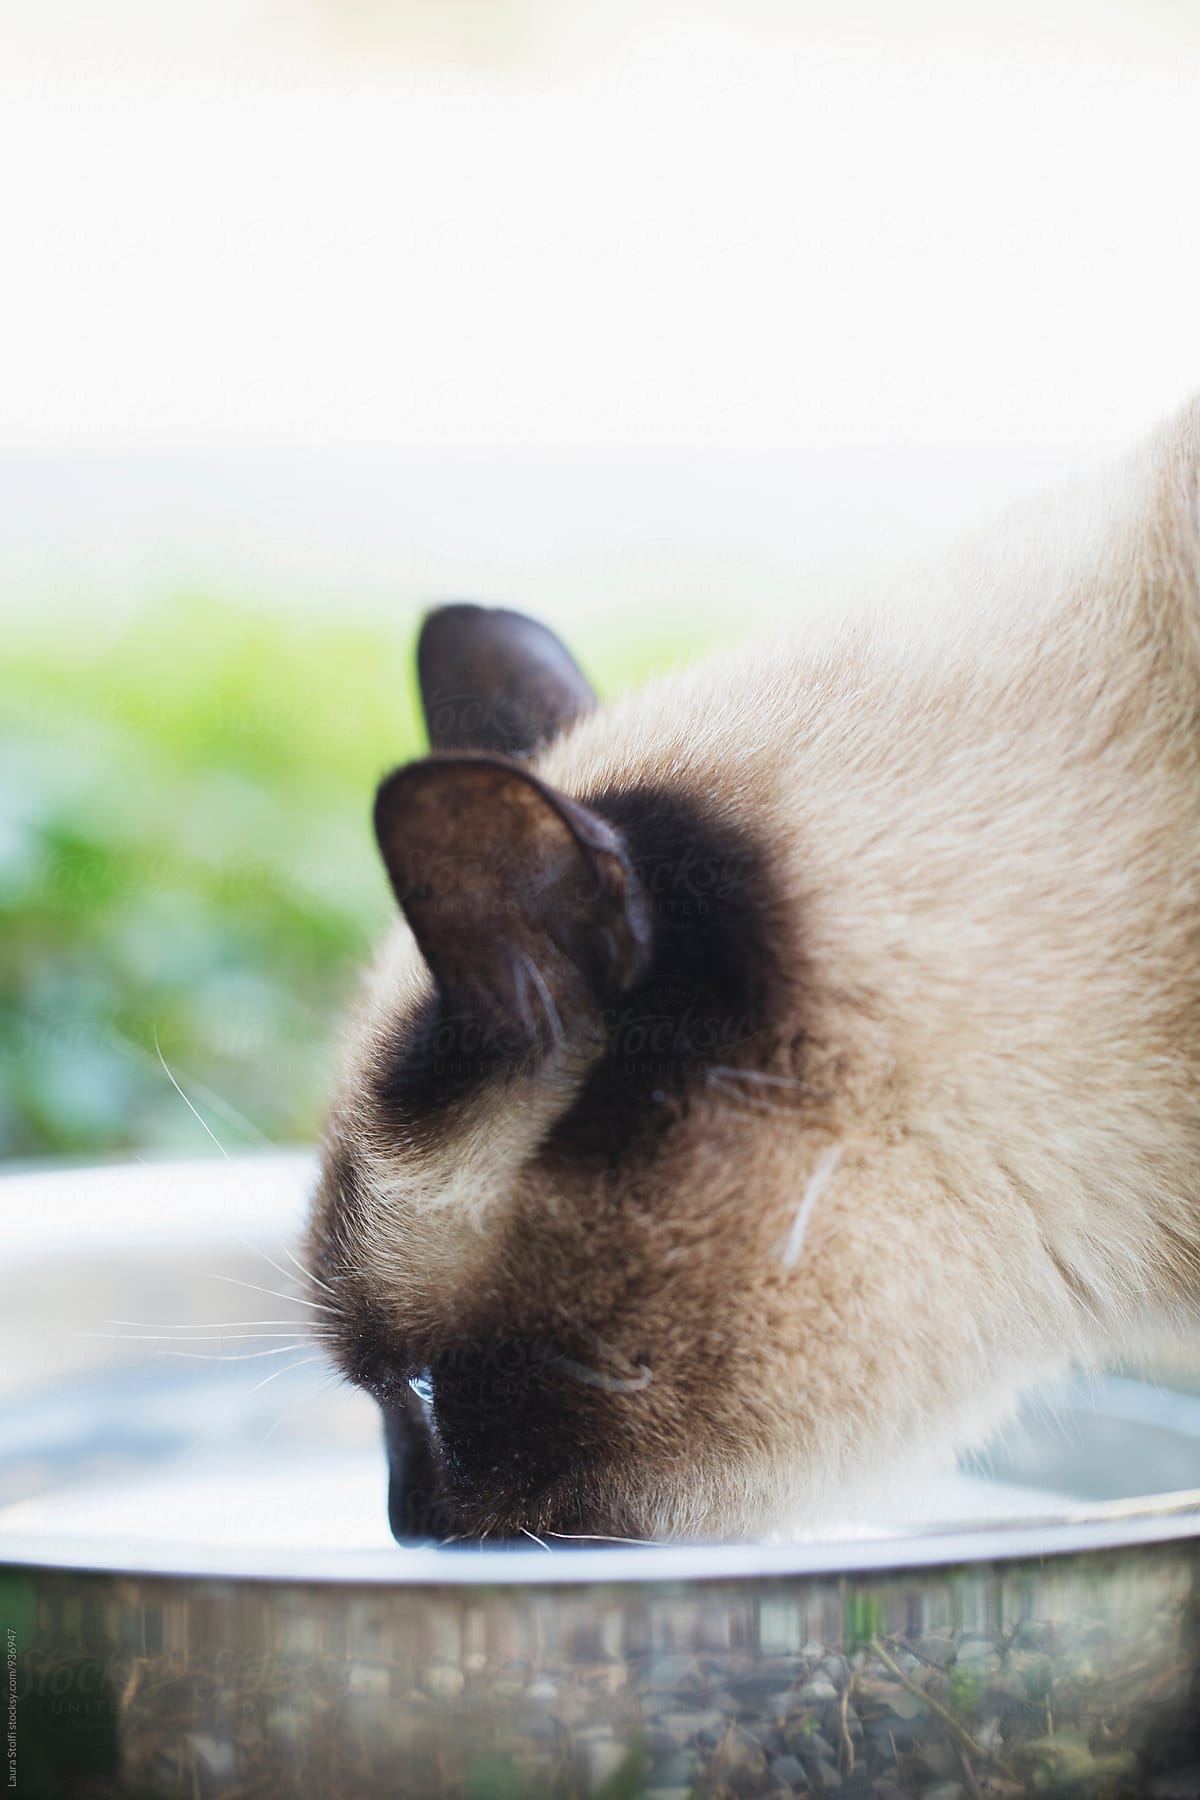 Extreme close up of siamese cat drinking water from metal bowl in sunny garden